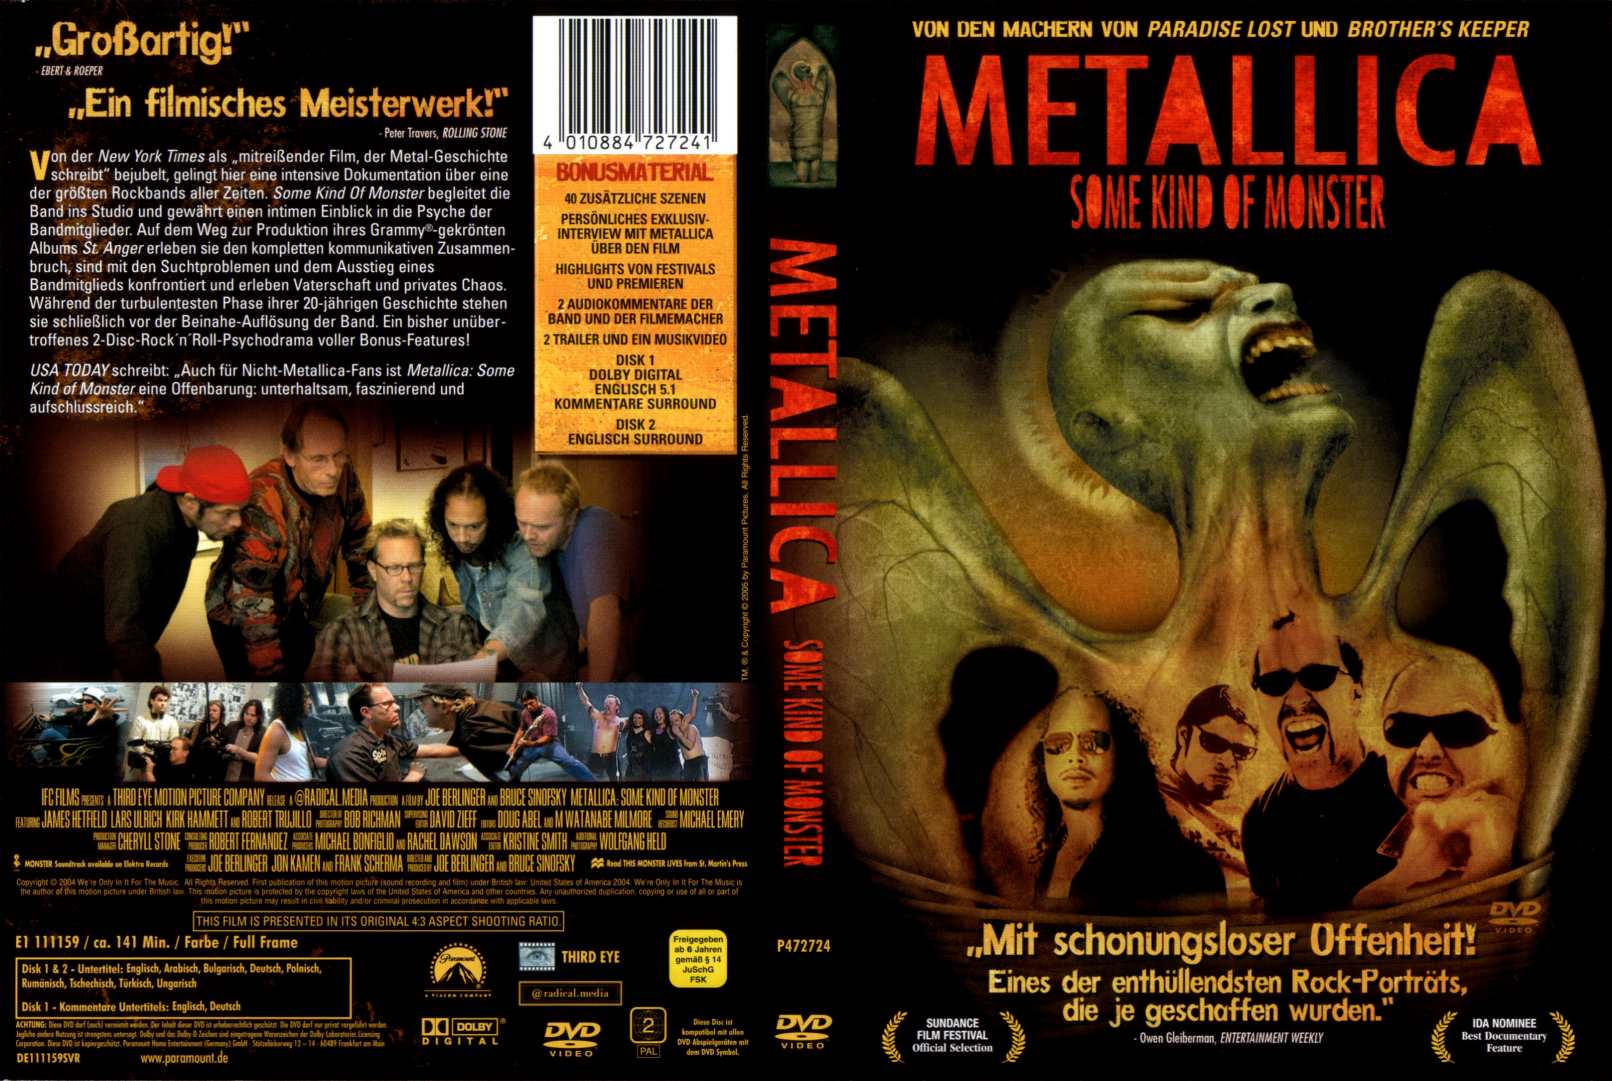 covery DVD - Metallica - Some Kind Of Monster.jpg